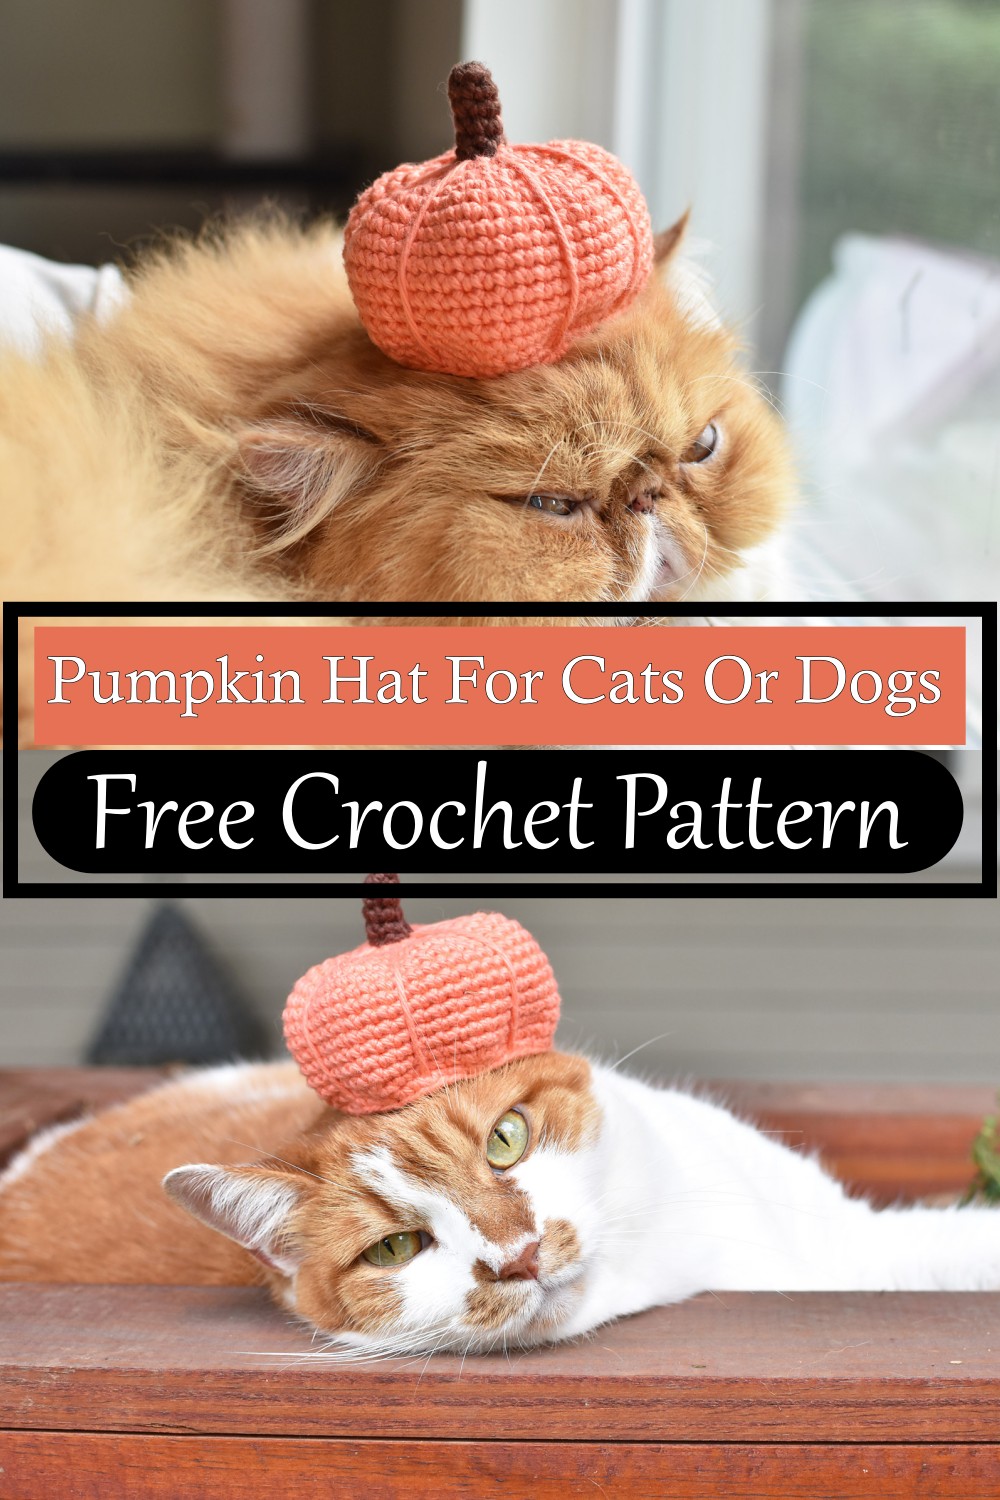 Pumpkin Hat For Cats Or Dogs